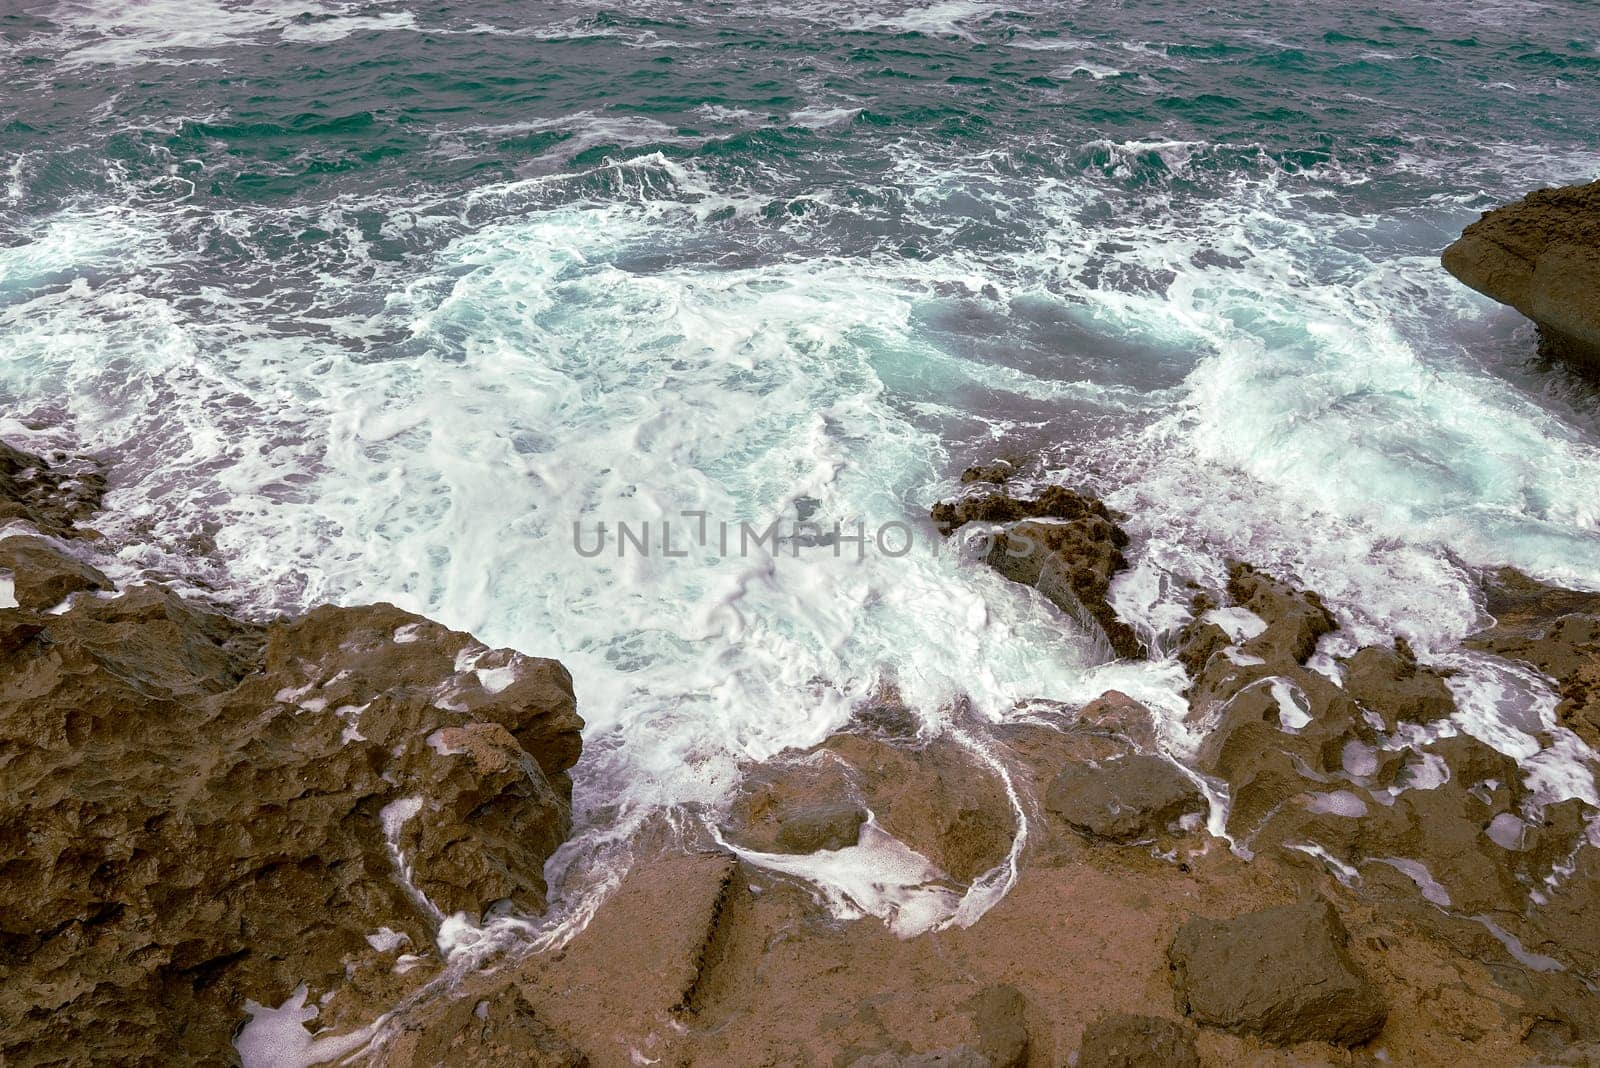 Waves breaking on the rocks at the shore of the beach by raul_ruiz